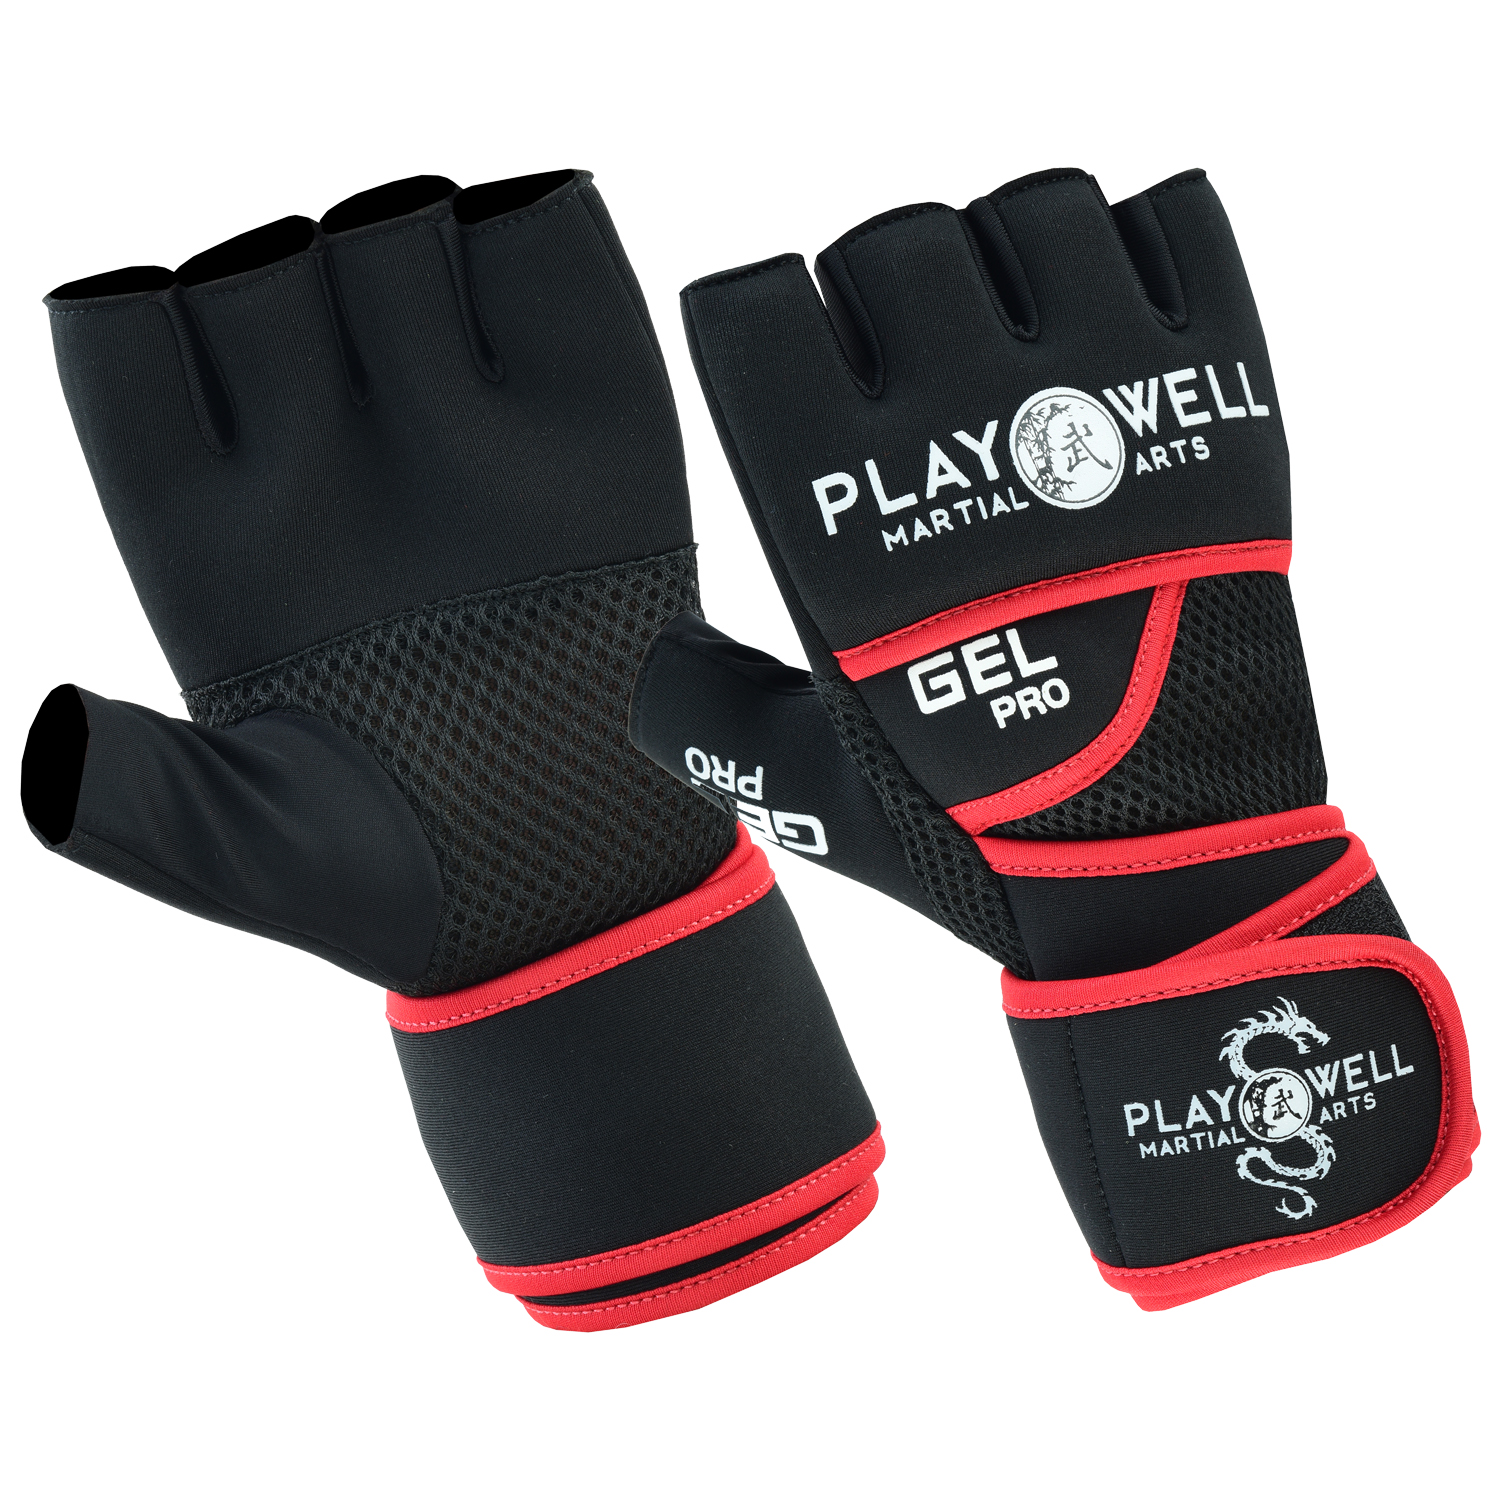 Playwell Elite Pro Gel Hand Wrap Inner Gloves - Black/Red - Click Image to Close